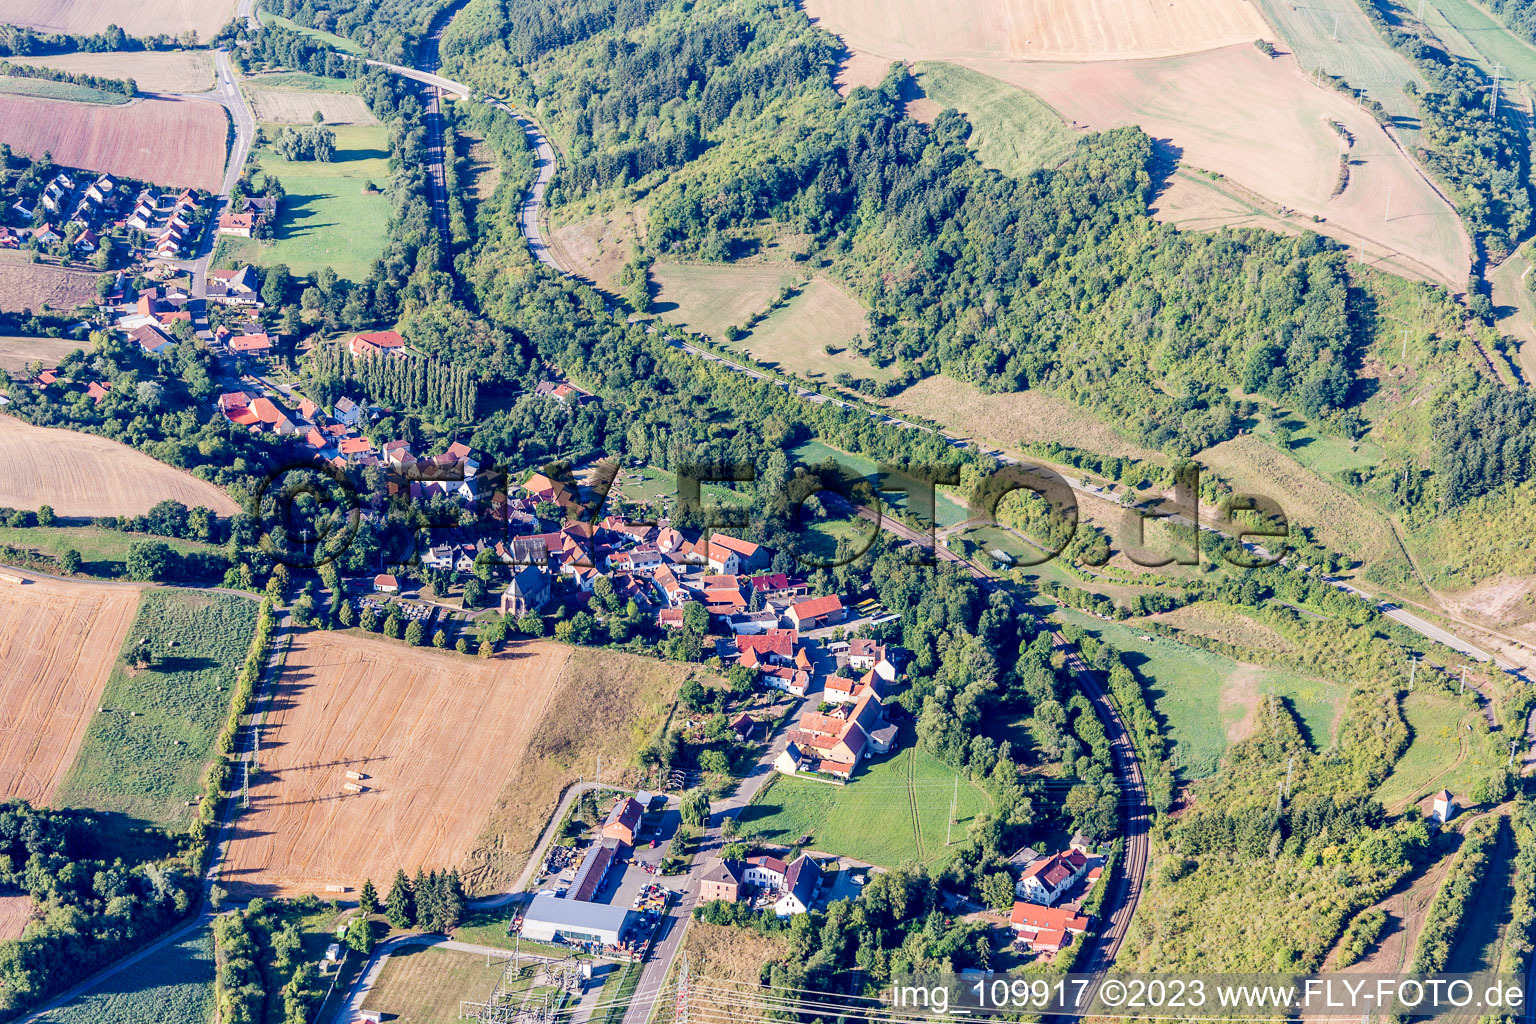 Oblique view of Alsenz in the state Rhineland-Palatinate, Germany